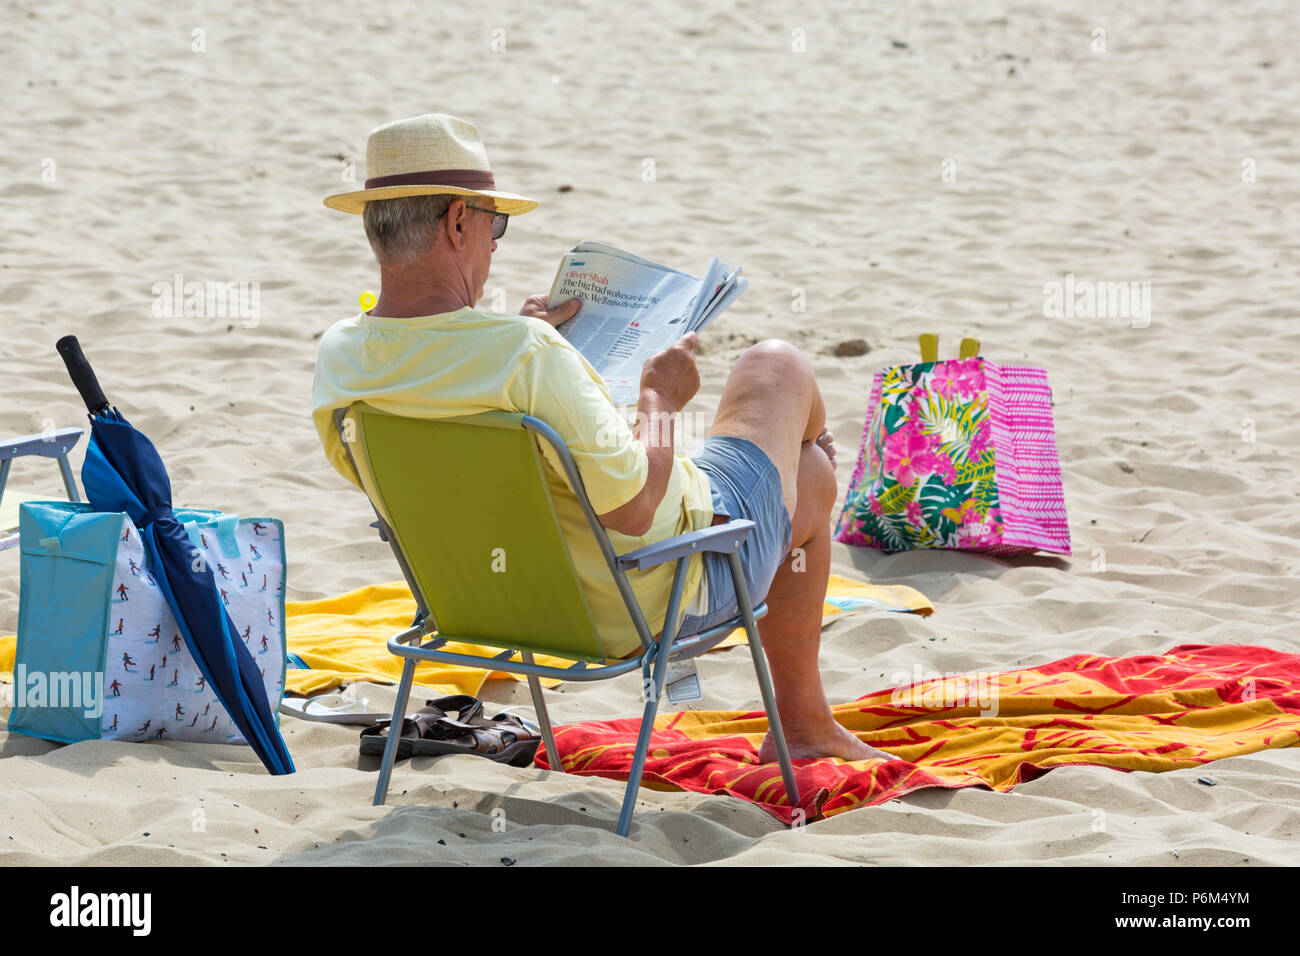 Bournemouth, Dorset, UK. 1st July 2018. UK weather: hazy sunshine, but still warm as thousands of sunseekers head to the beaches at Bournemouth to enjoy a day at the seaside. Prepared for all weathers! Man sitting in chair reading the Sunday Times newspaper. Credit: Carolyn Jenkins/Alamy Live News Stock Photo